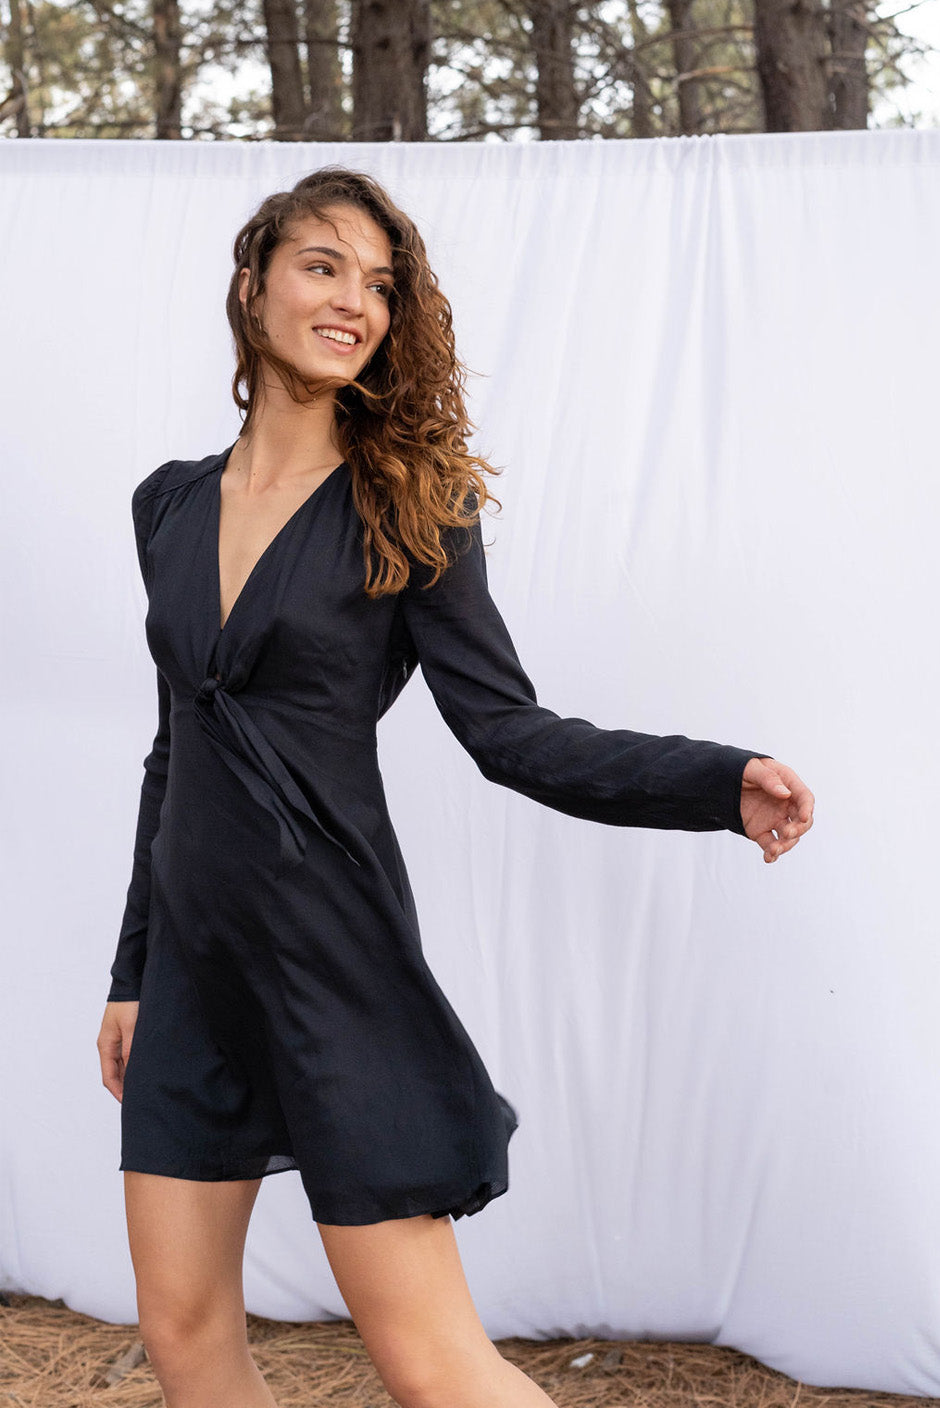 Holly mini dress in noir black color for women by Paneros Clothing. Handmade from sustainable deadstock rayon fabric, with a tie neck front with full sleeves and smocking. Side view.